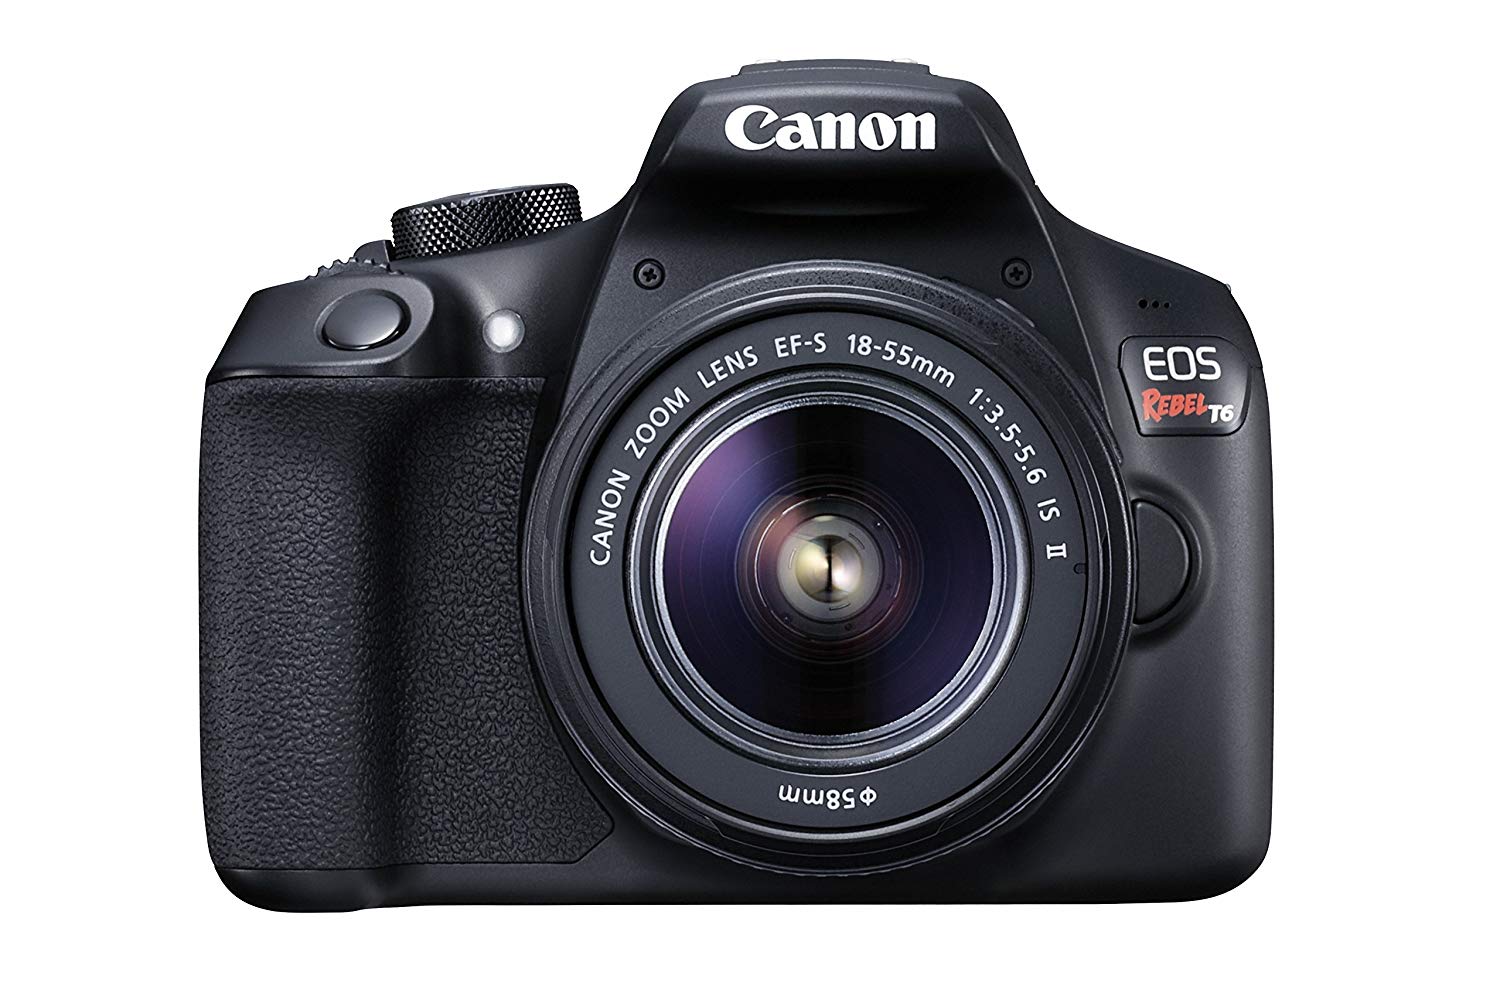 Canon EOS Rebel T6 Digital SLR Camera Kit with EF-S 18-55mm f/3.5-5.6 IS II Lens 